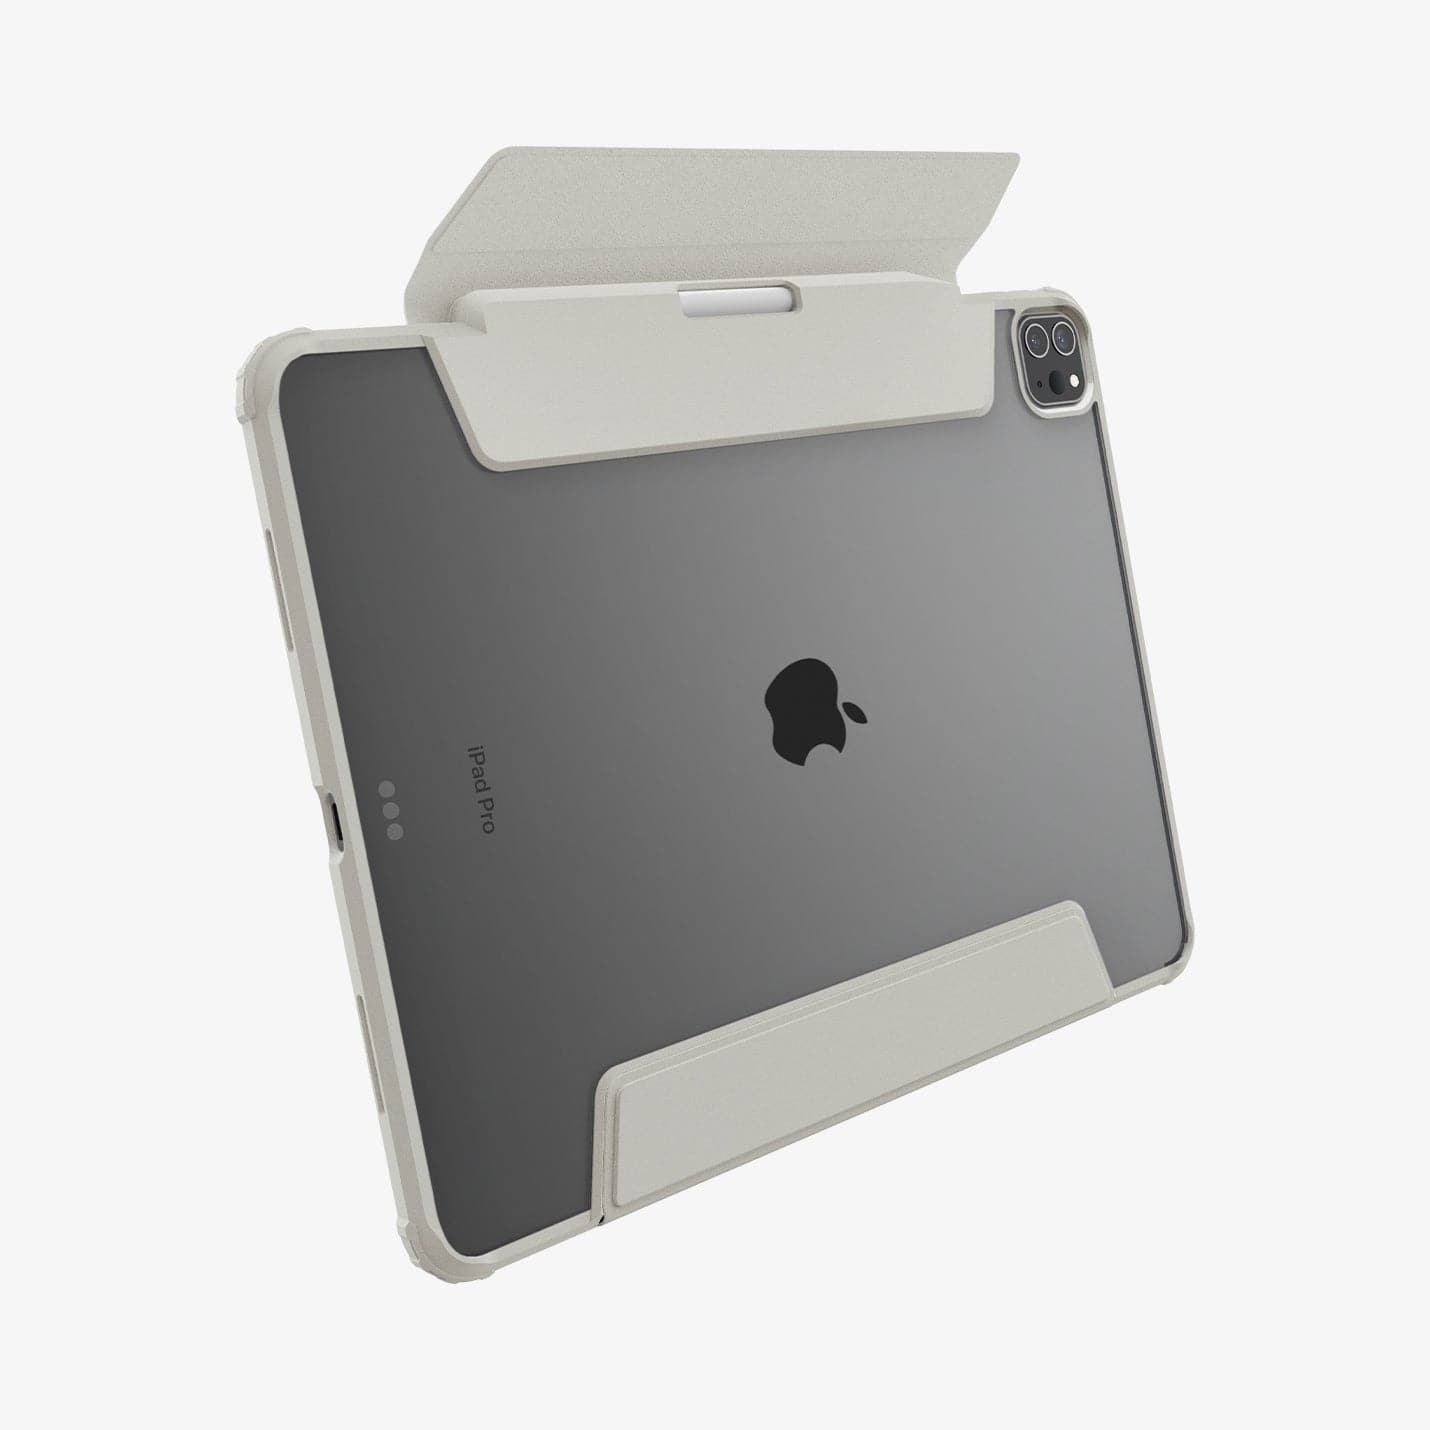  ACS06076 - iPad Pro 12.9" Case Air Skin Pro in gray showing the back and bottom with cover flap open